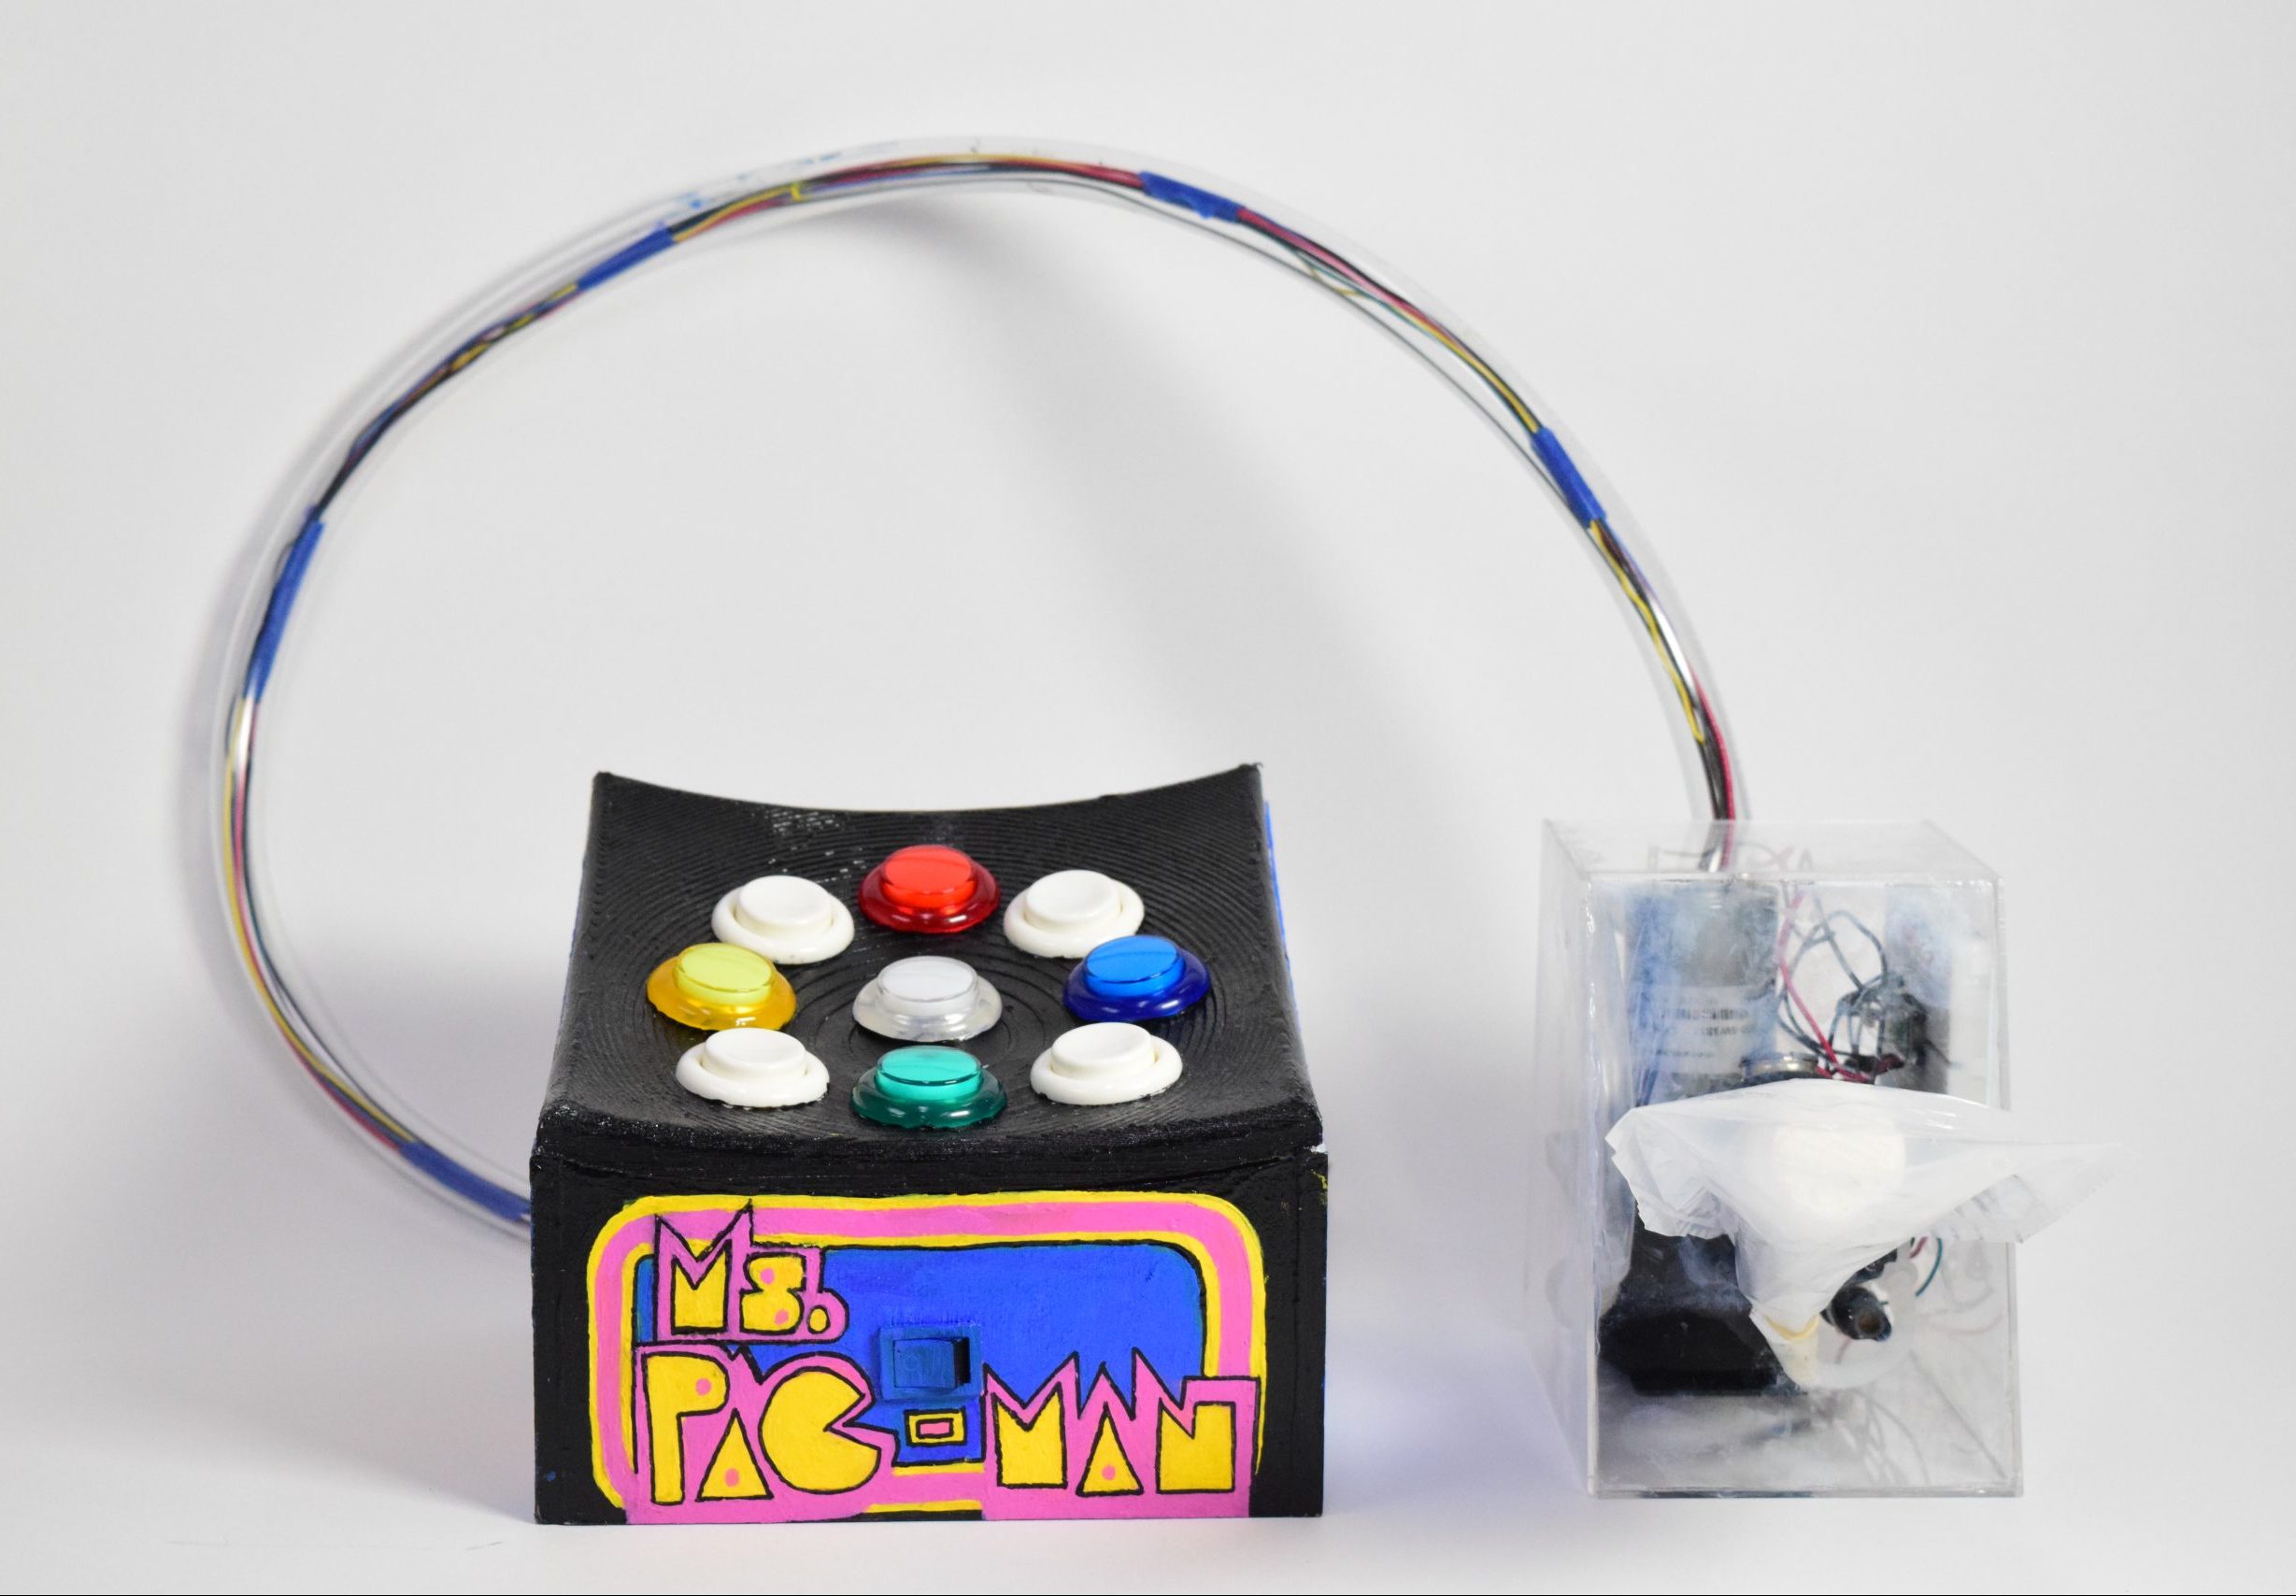 This picture shows a black box with a curved surface. There are 9 colored arcade buttons on its surface. On the front side of the box there "Ms. Pac - Man" is drawn in graphic letters. There is a clear tuber with wires inside that connects the black box to an acrylic casing that holds more wires. There is a joy stick attached to the acrylic casing.